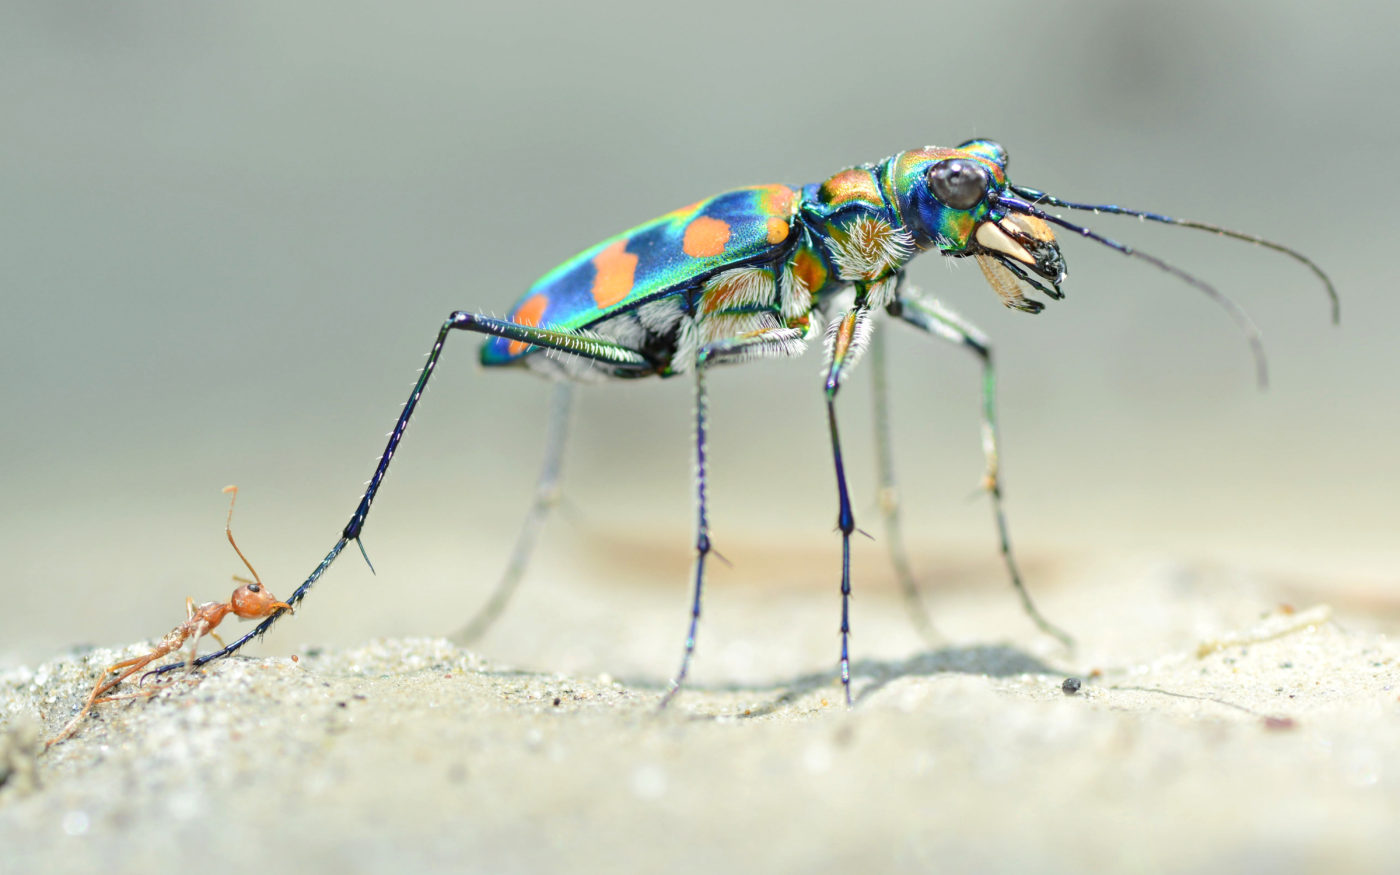 Tiger beetle and weaver ant.